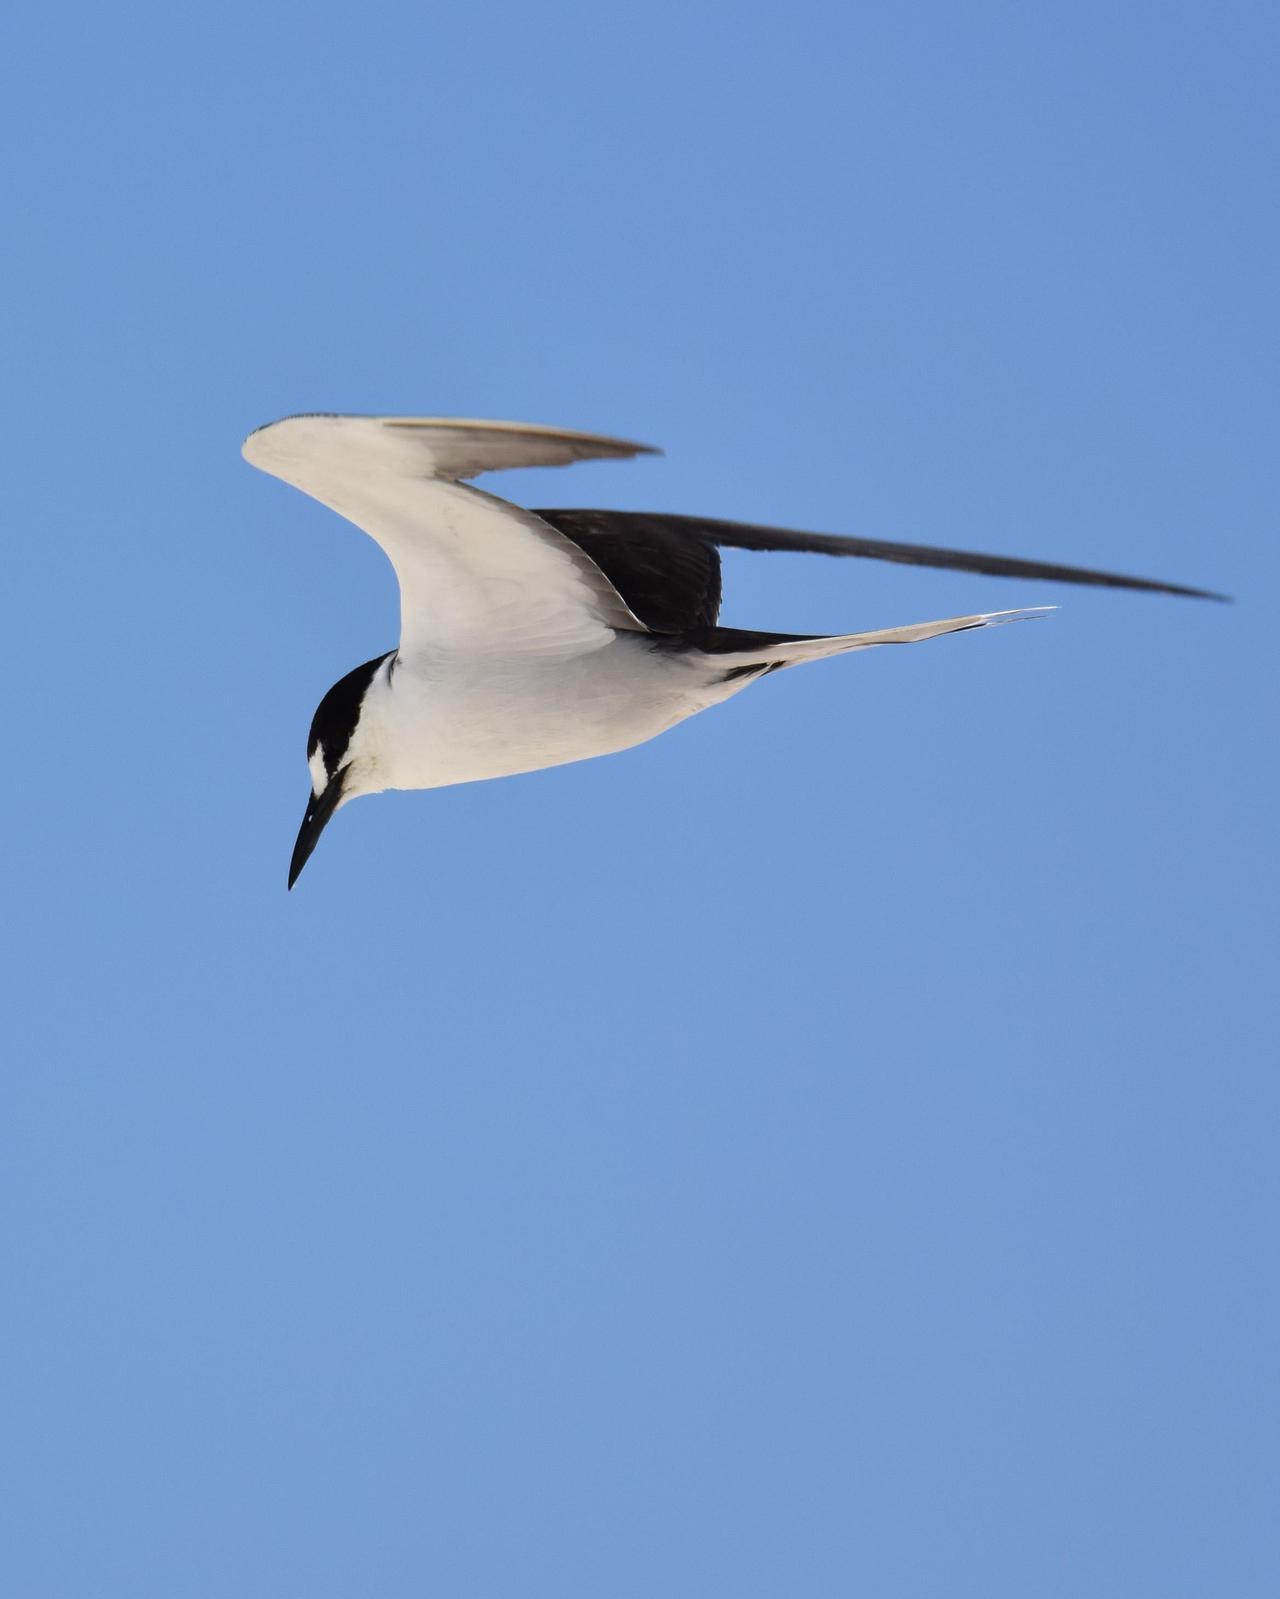 Sooty Tern Photo by Emily Percival